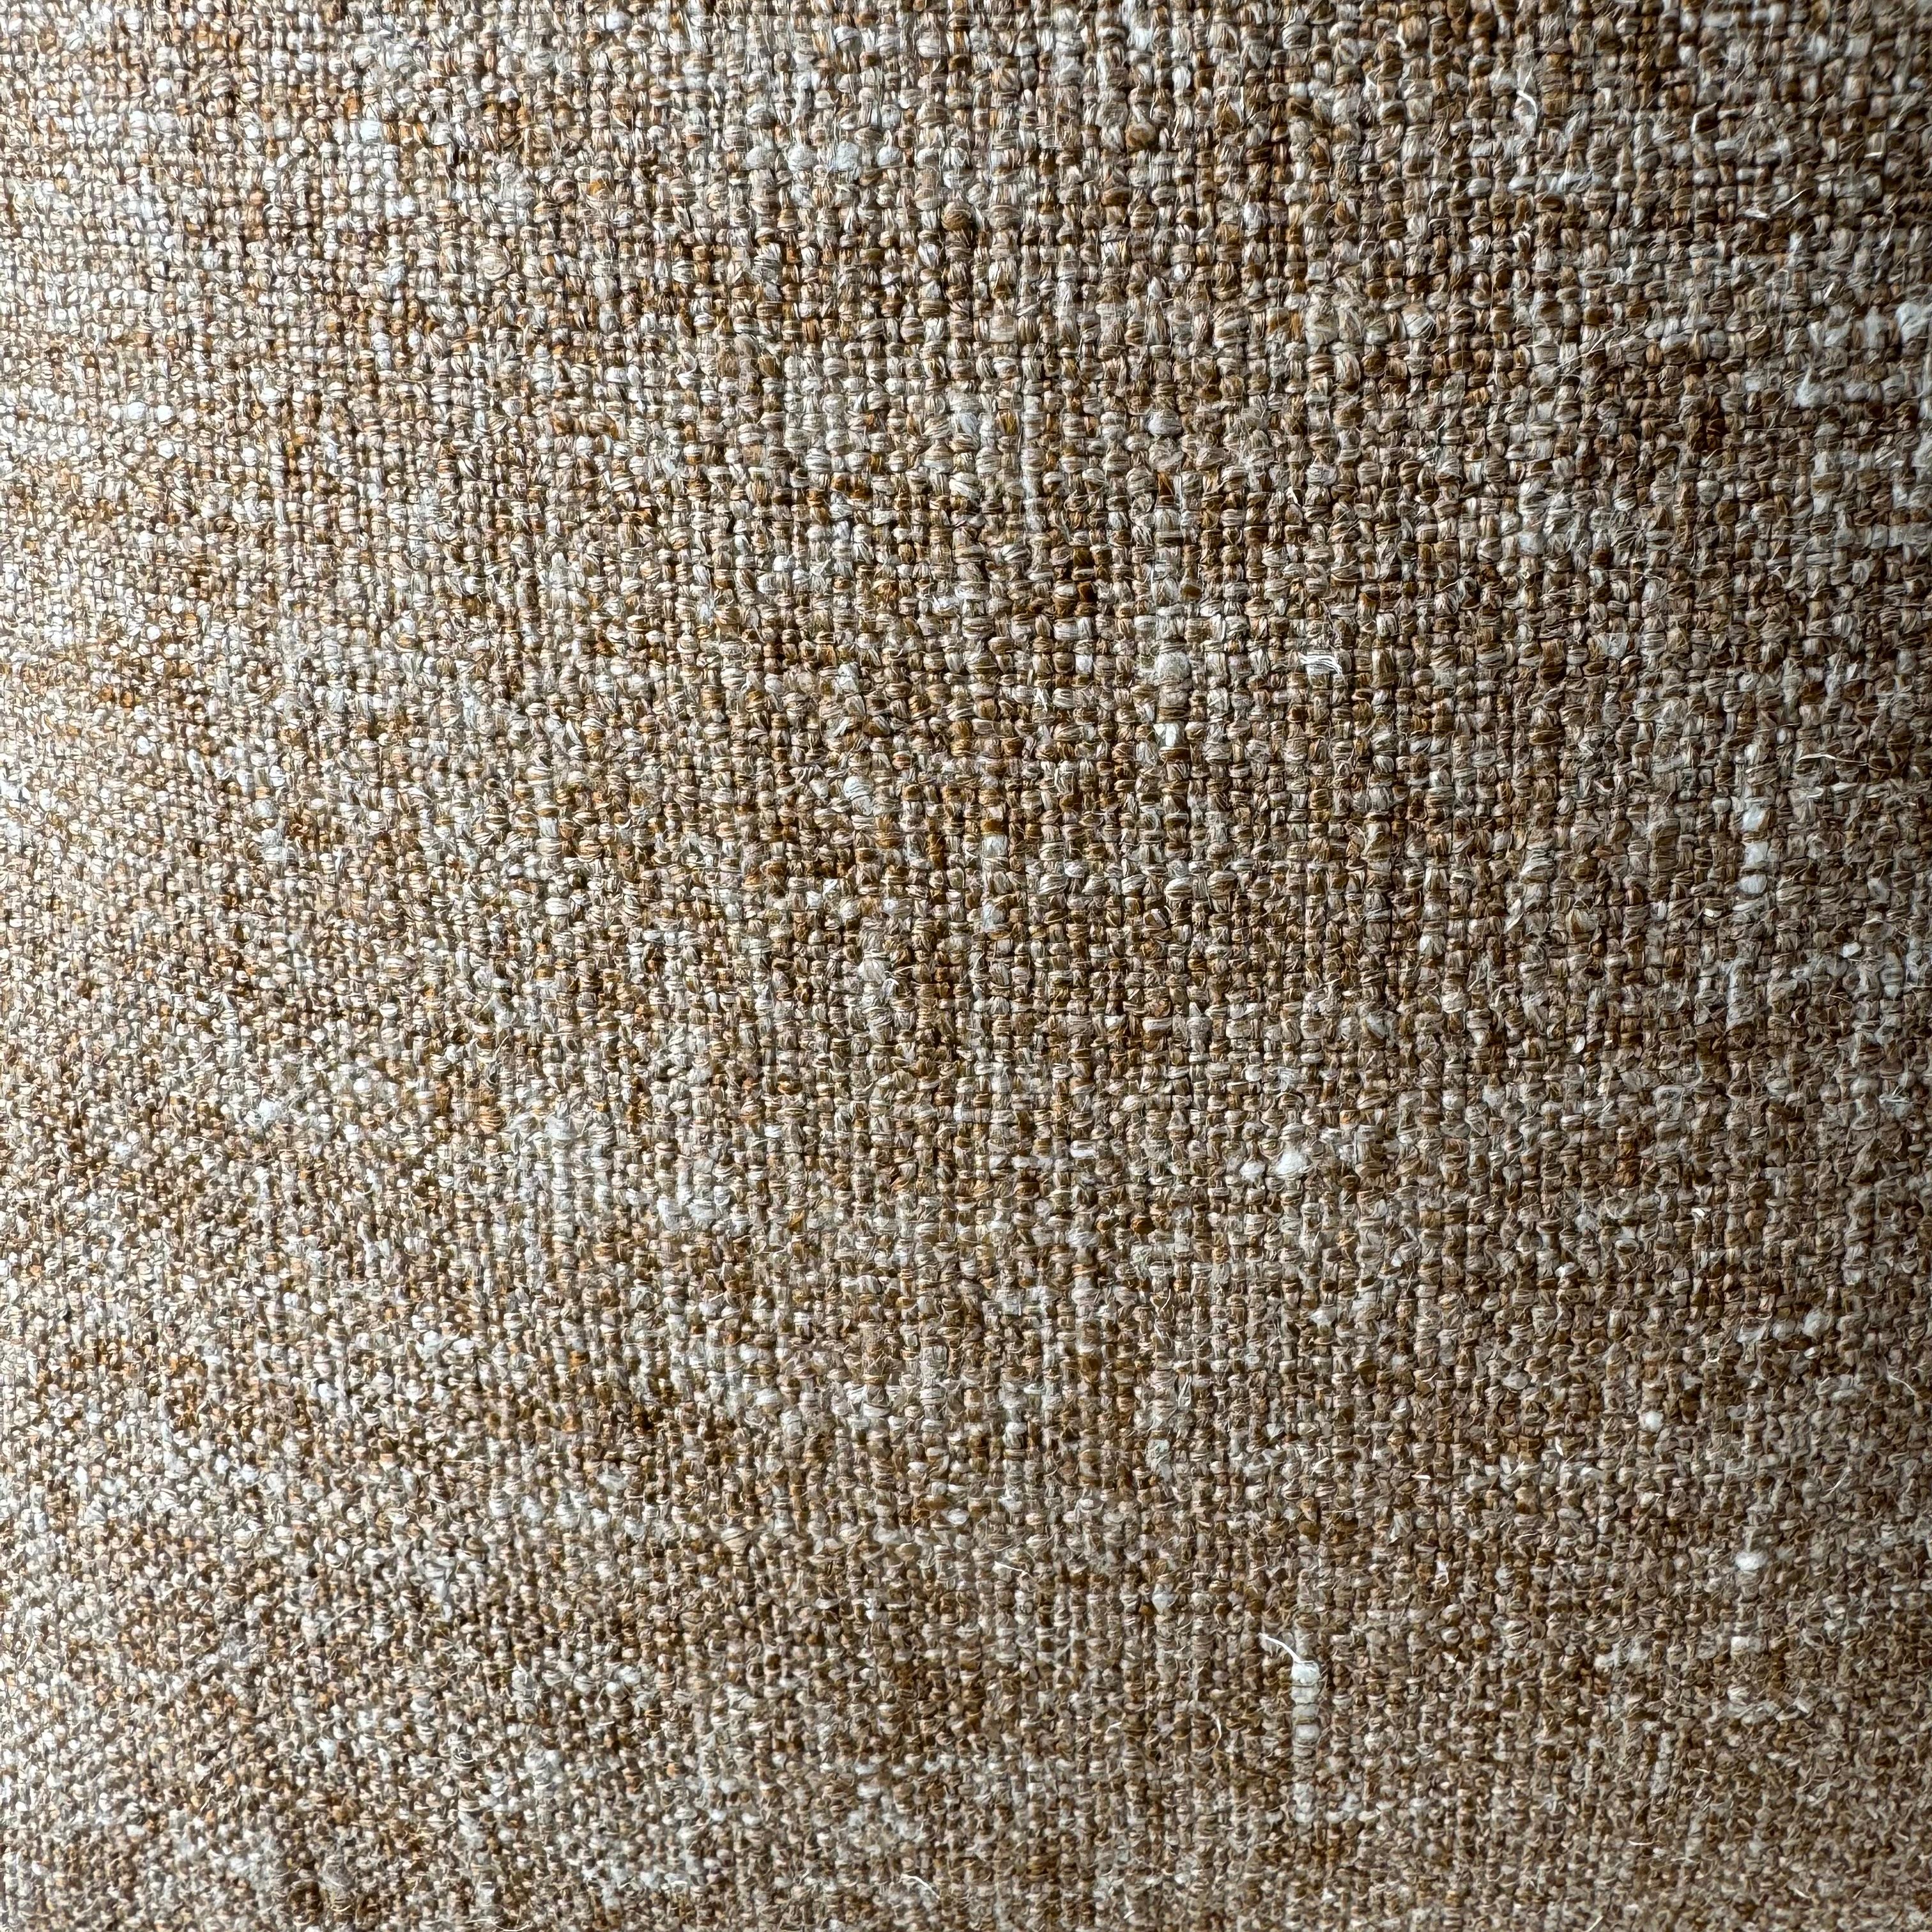 Custom Heavy Textured Linen Pillow in Bejmat Brown with Down Insert In New Condition For Sale In Brea, CA